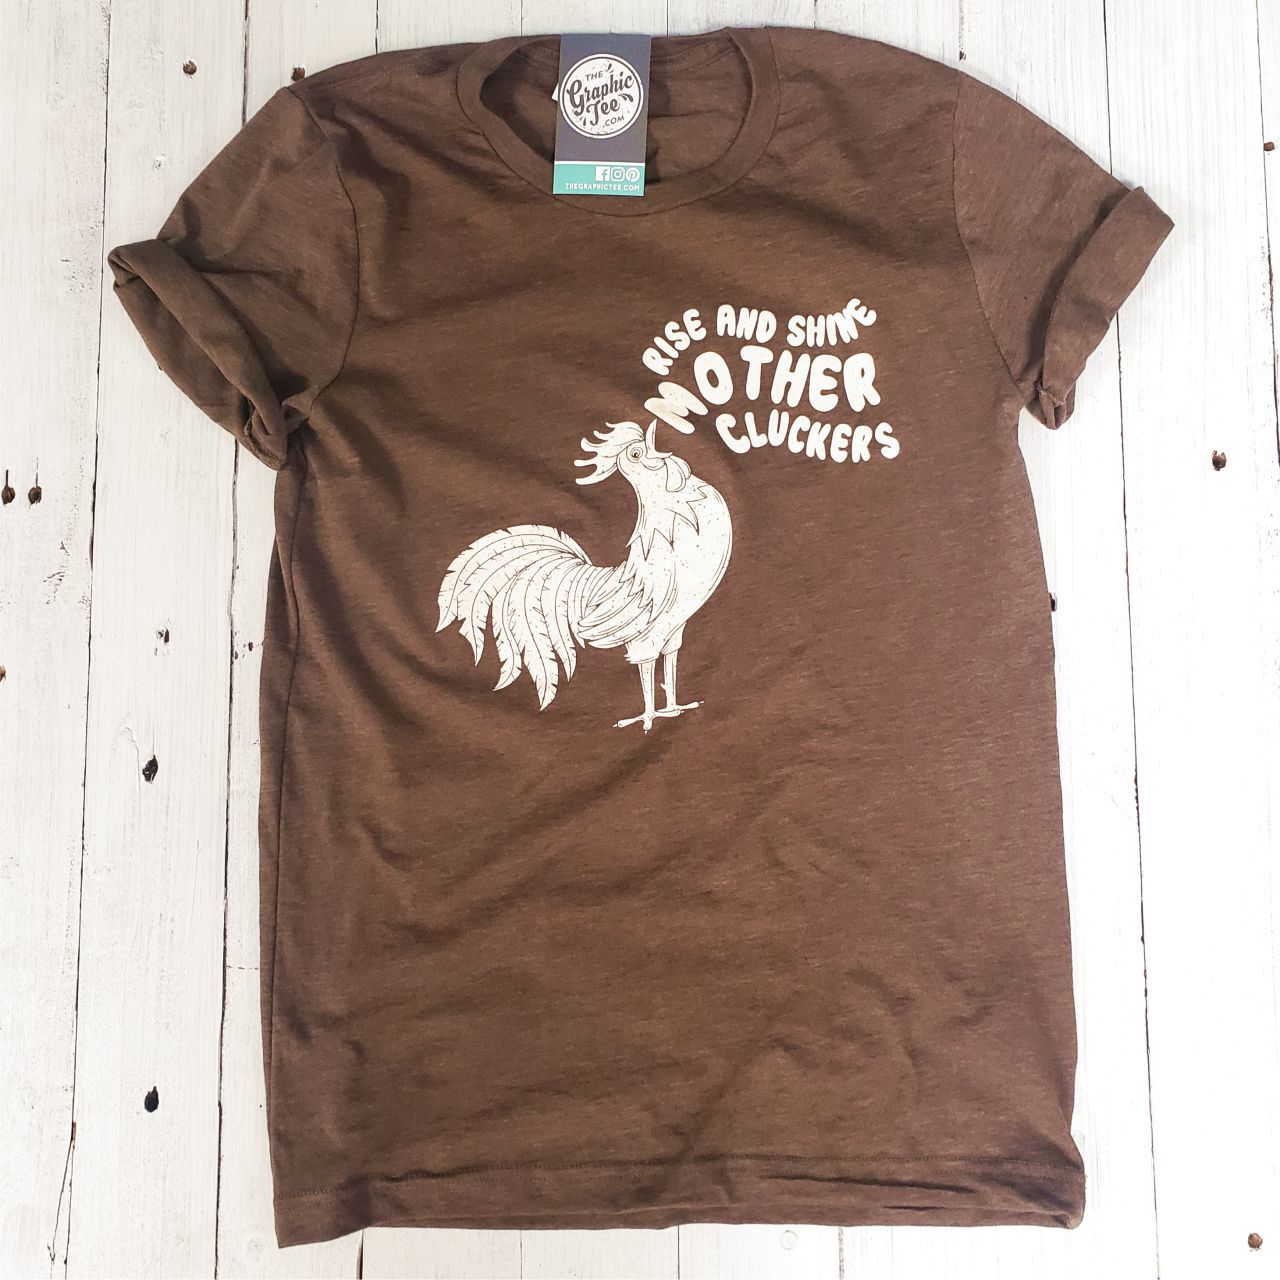 Rise and Shine Mother Cluckers - Unisex Tee - The Graphic Tee